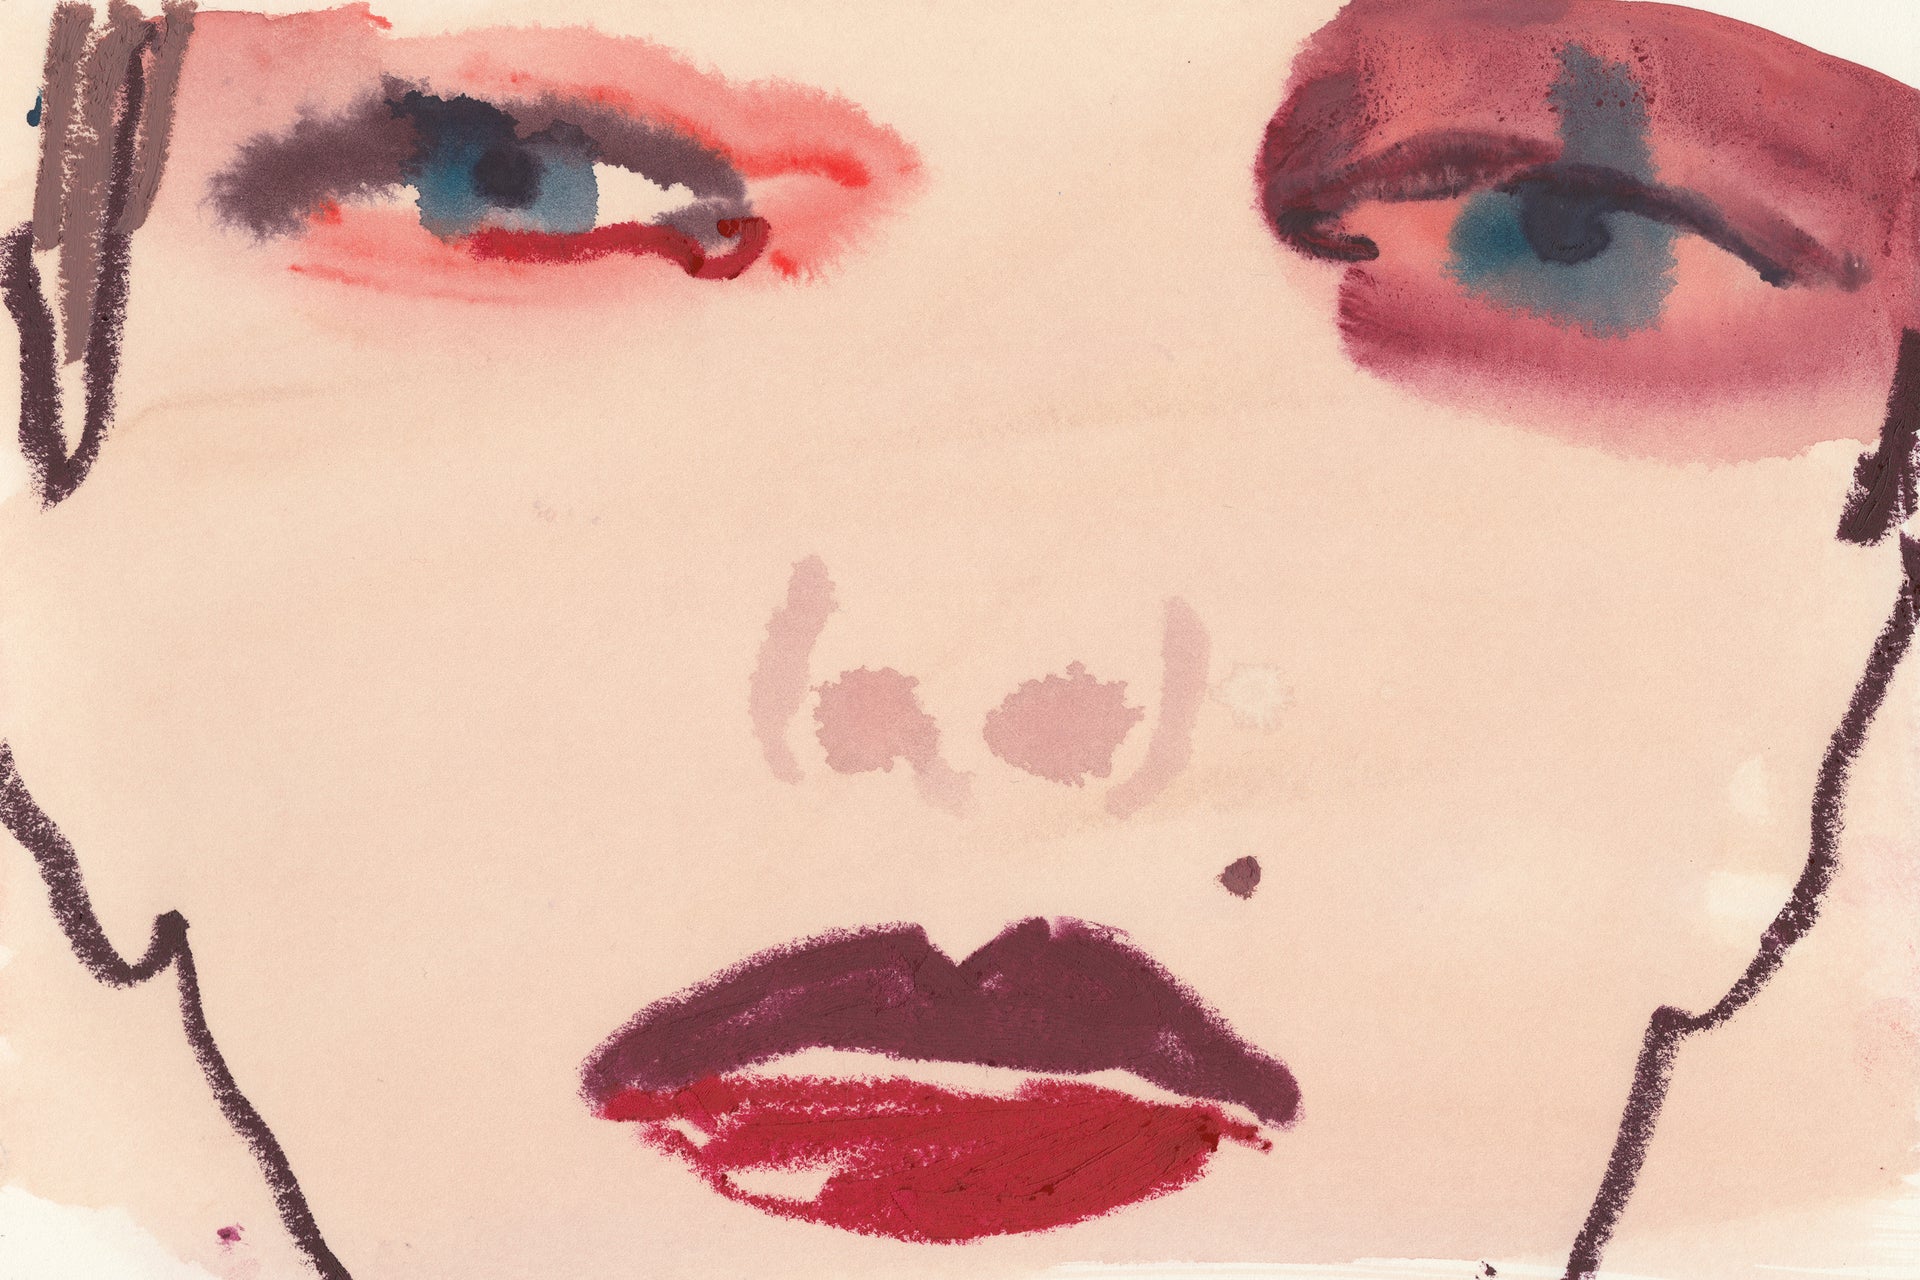 THE LIPSTICK DRAWING SERIES